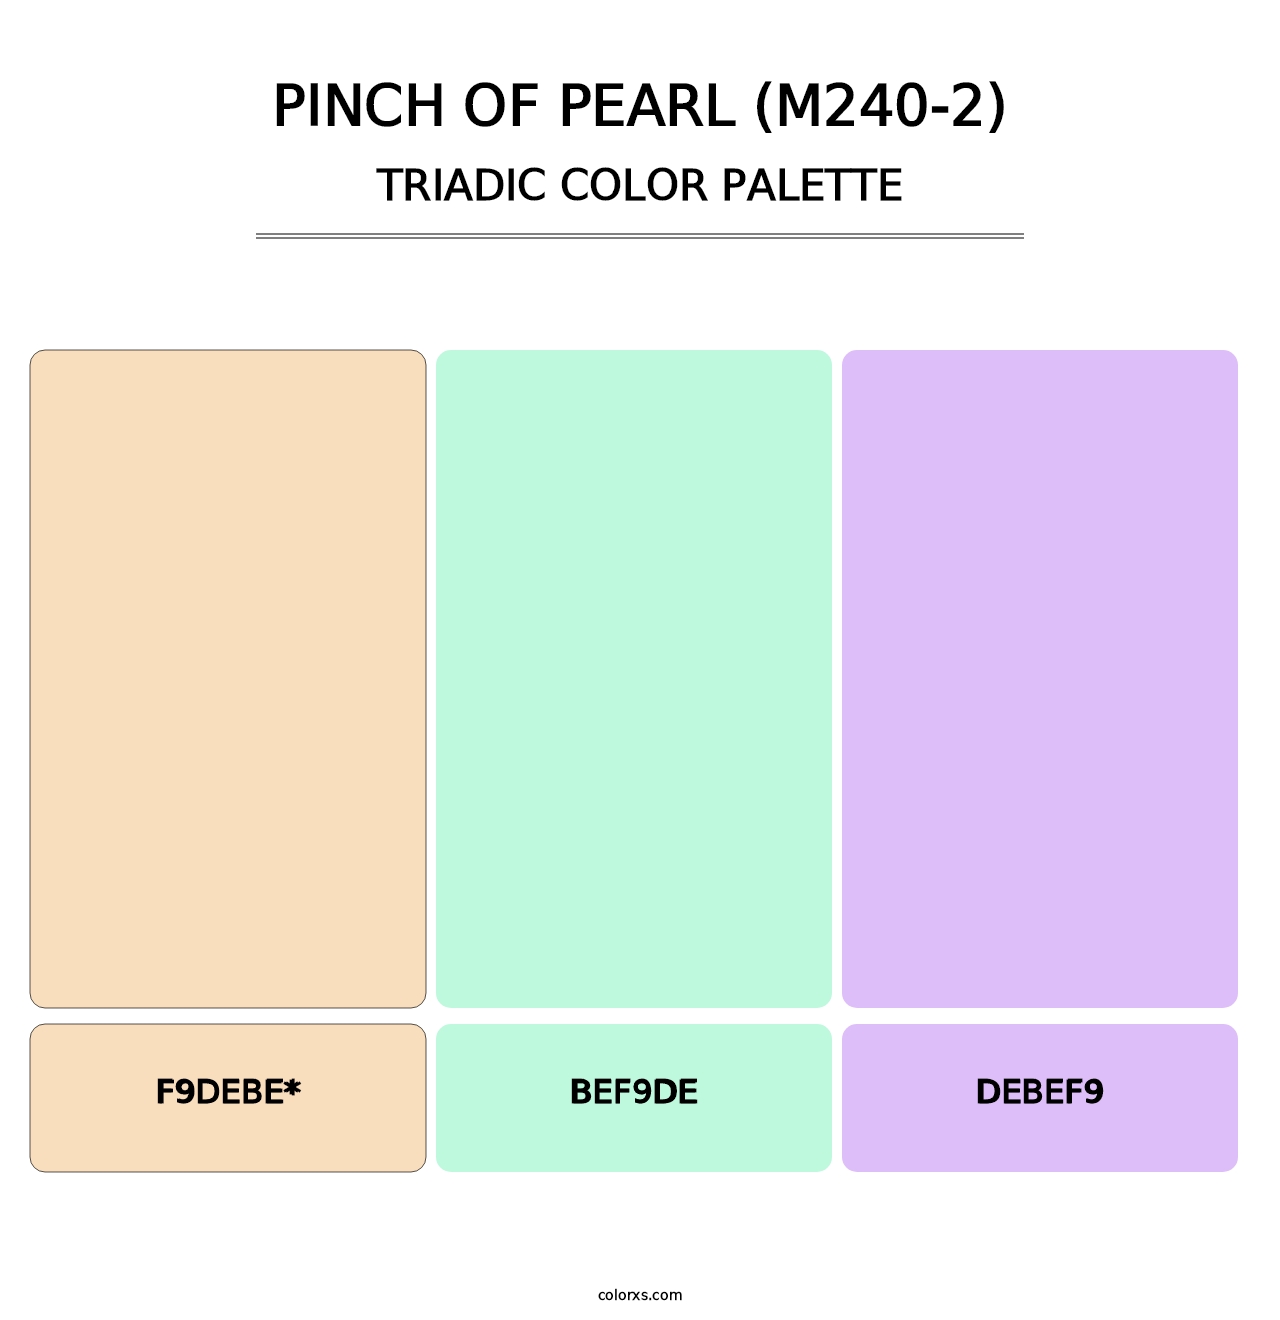 Pinch Of Pearl (M240-2) - Triadic Color Palette